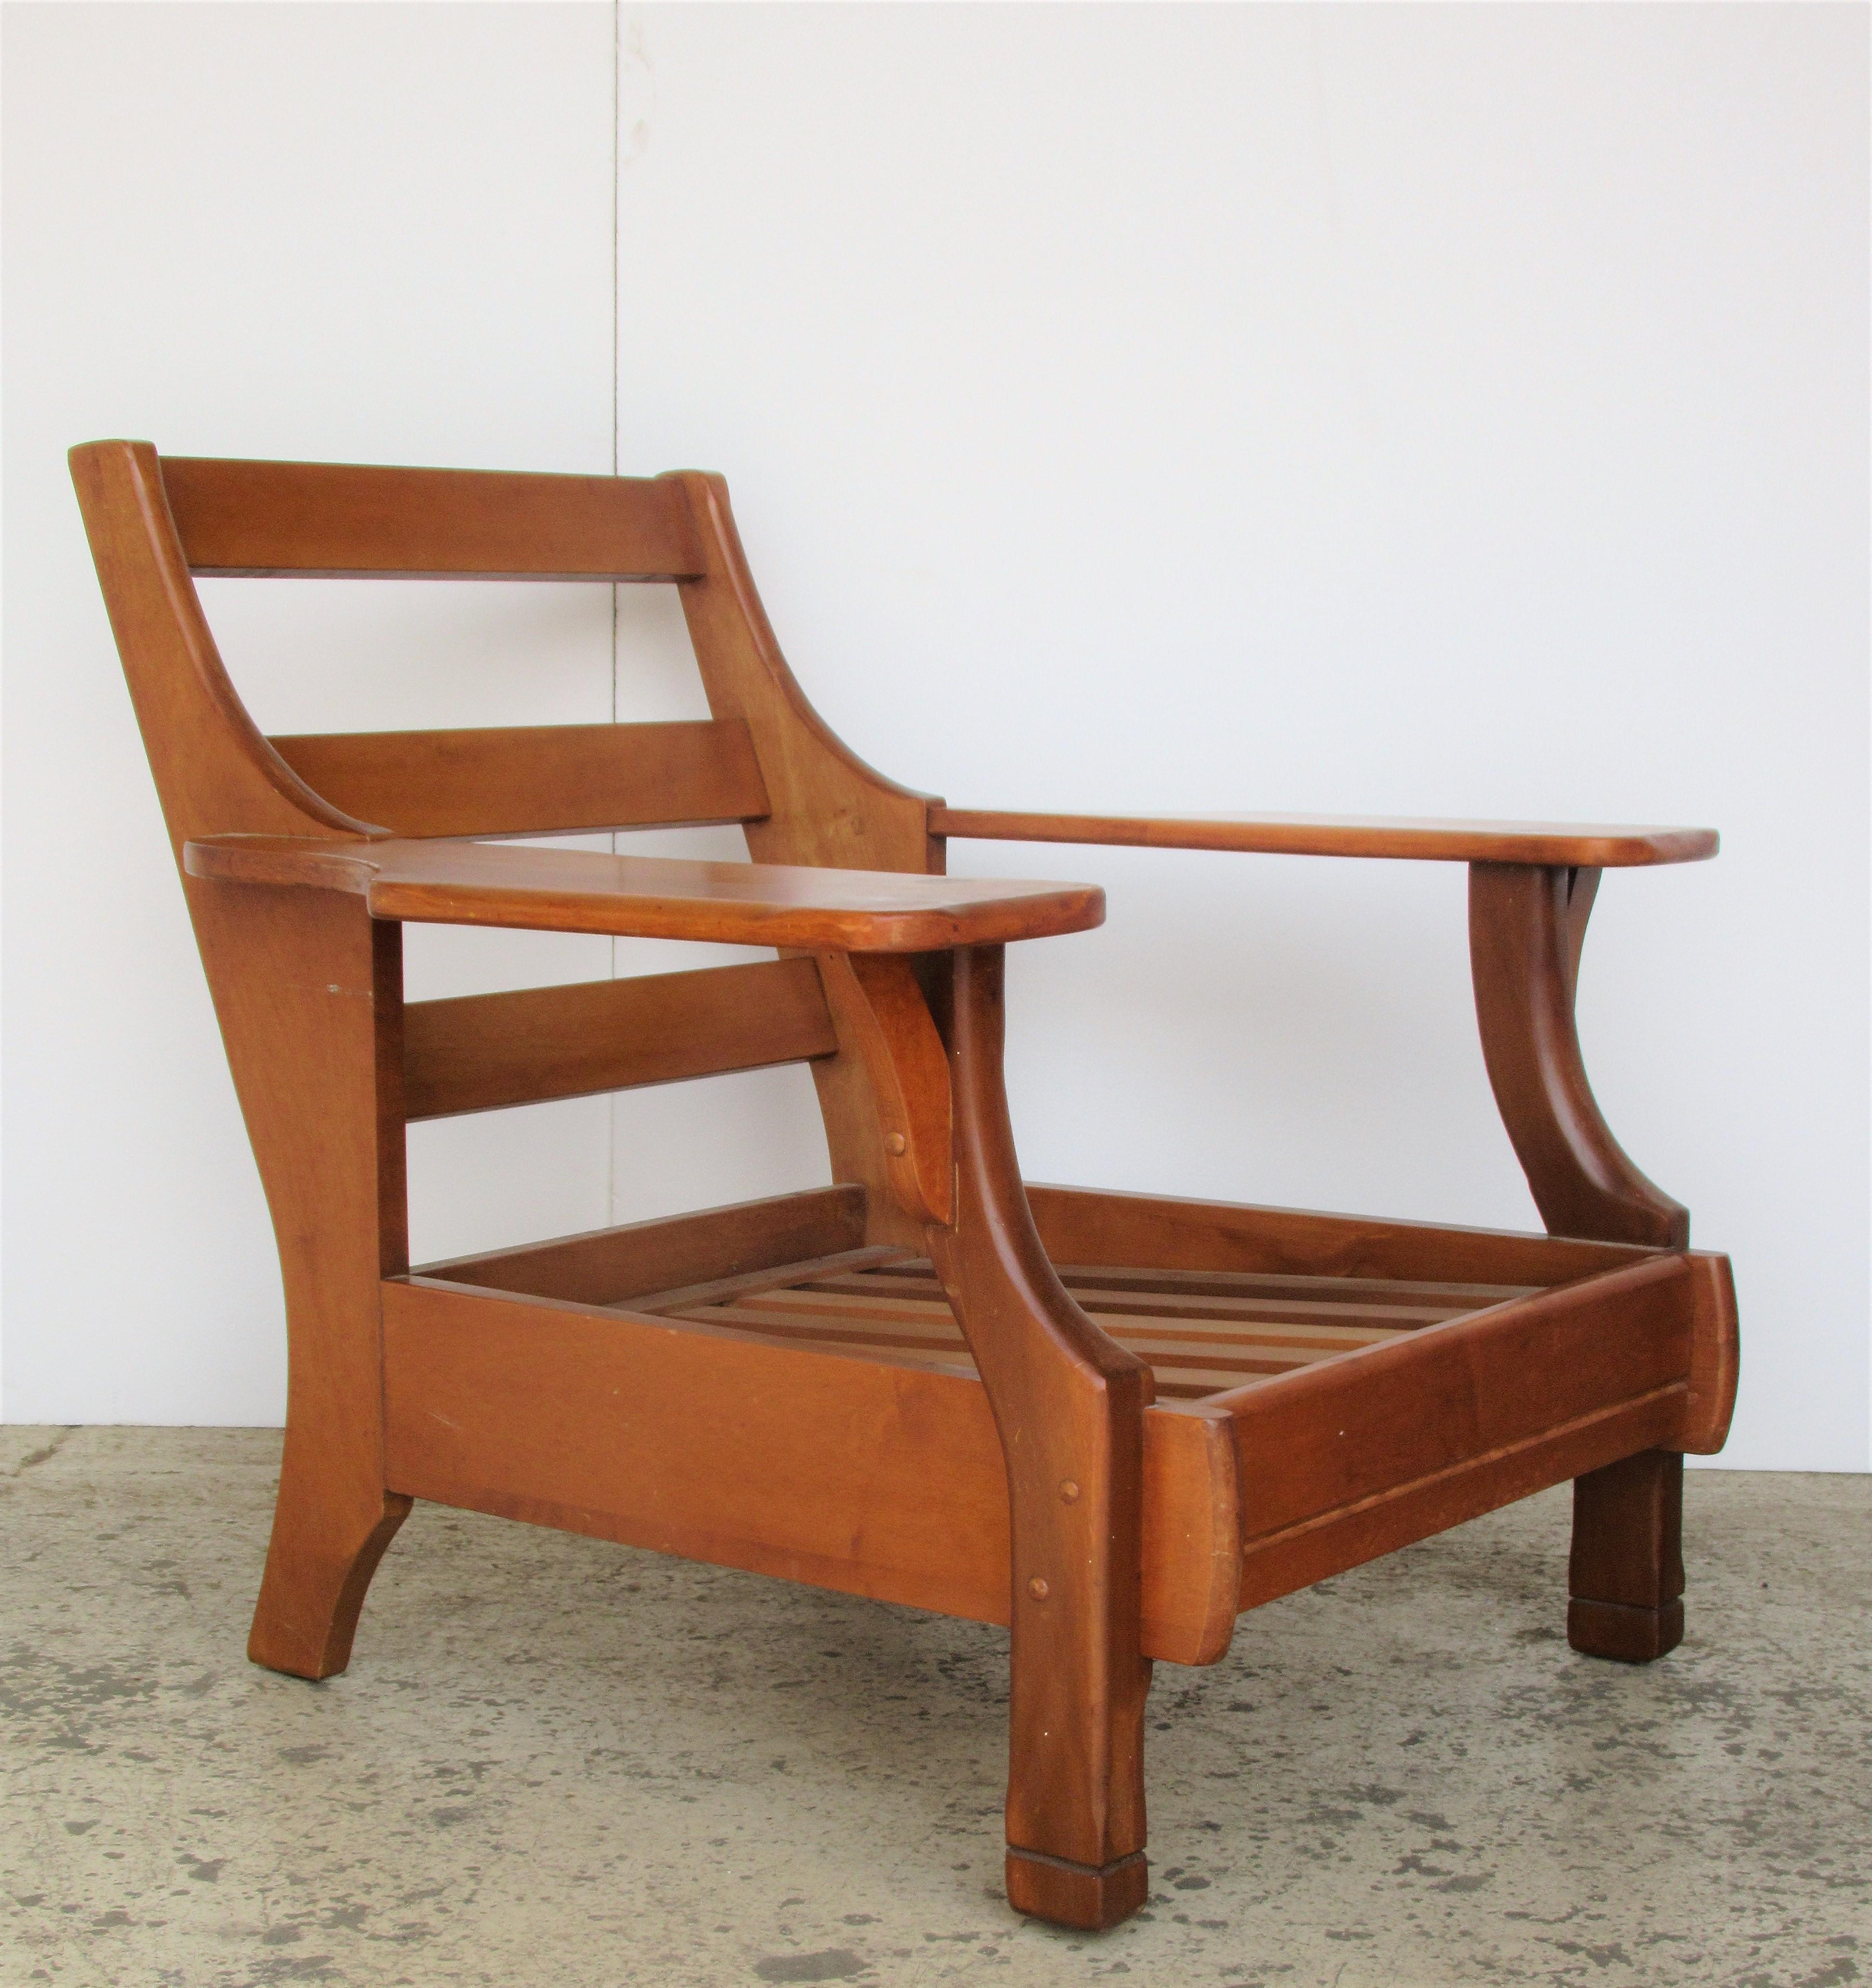 Mid-20th Century 1940s American Rustic Wide Paddle Arm Maple Lounge Chairs